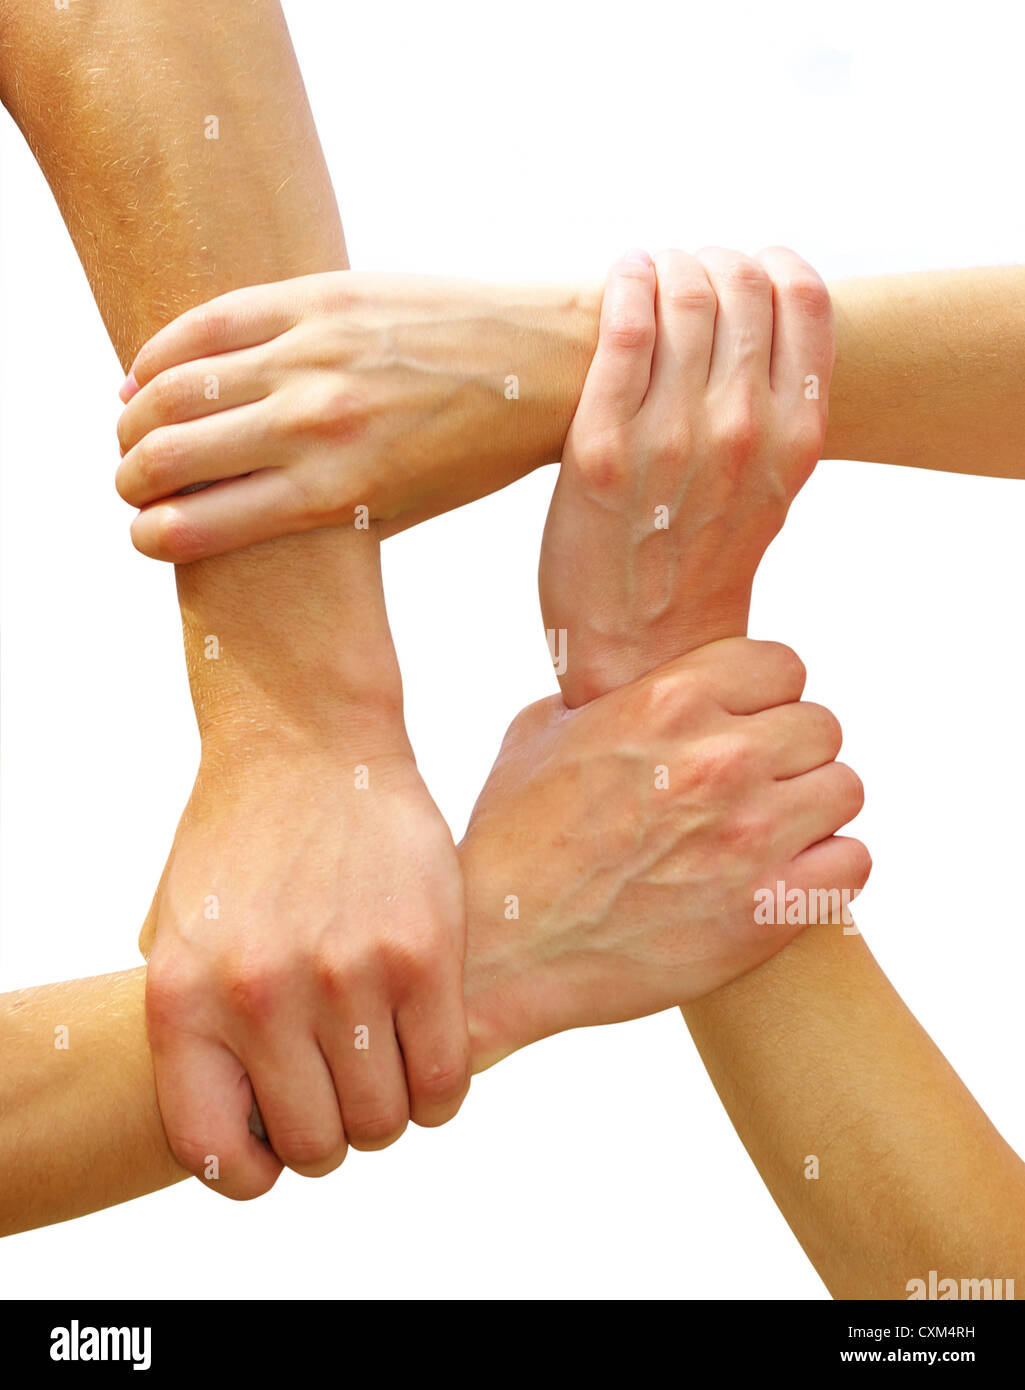 Linked hands on a white background Stock Photo